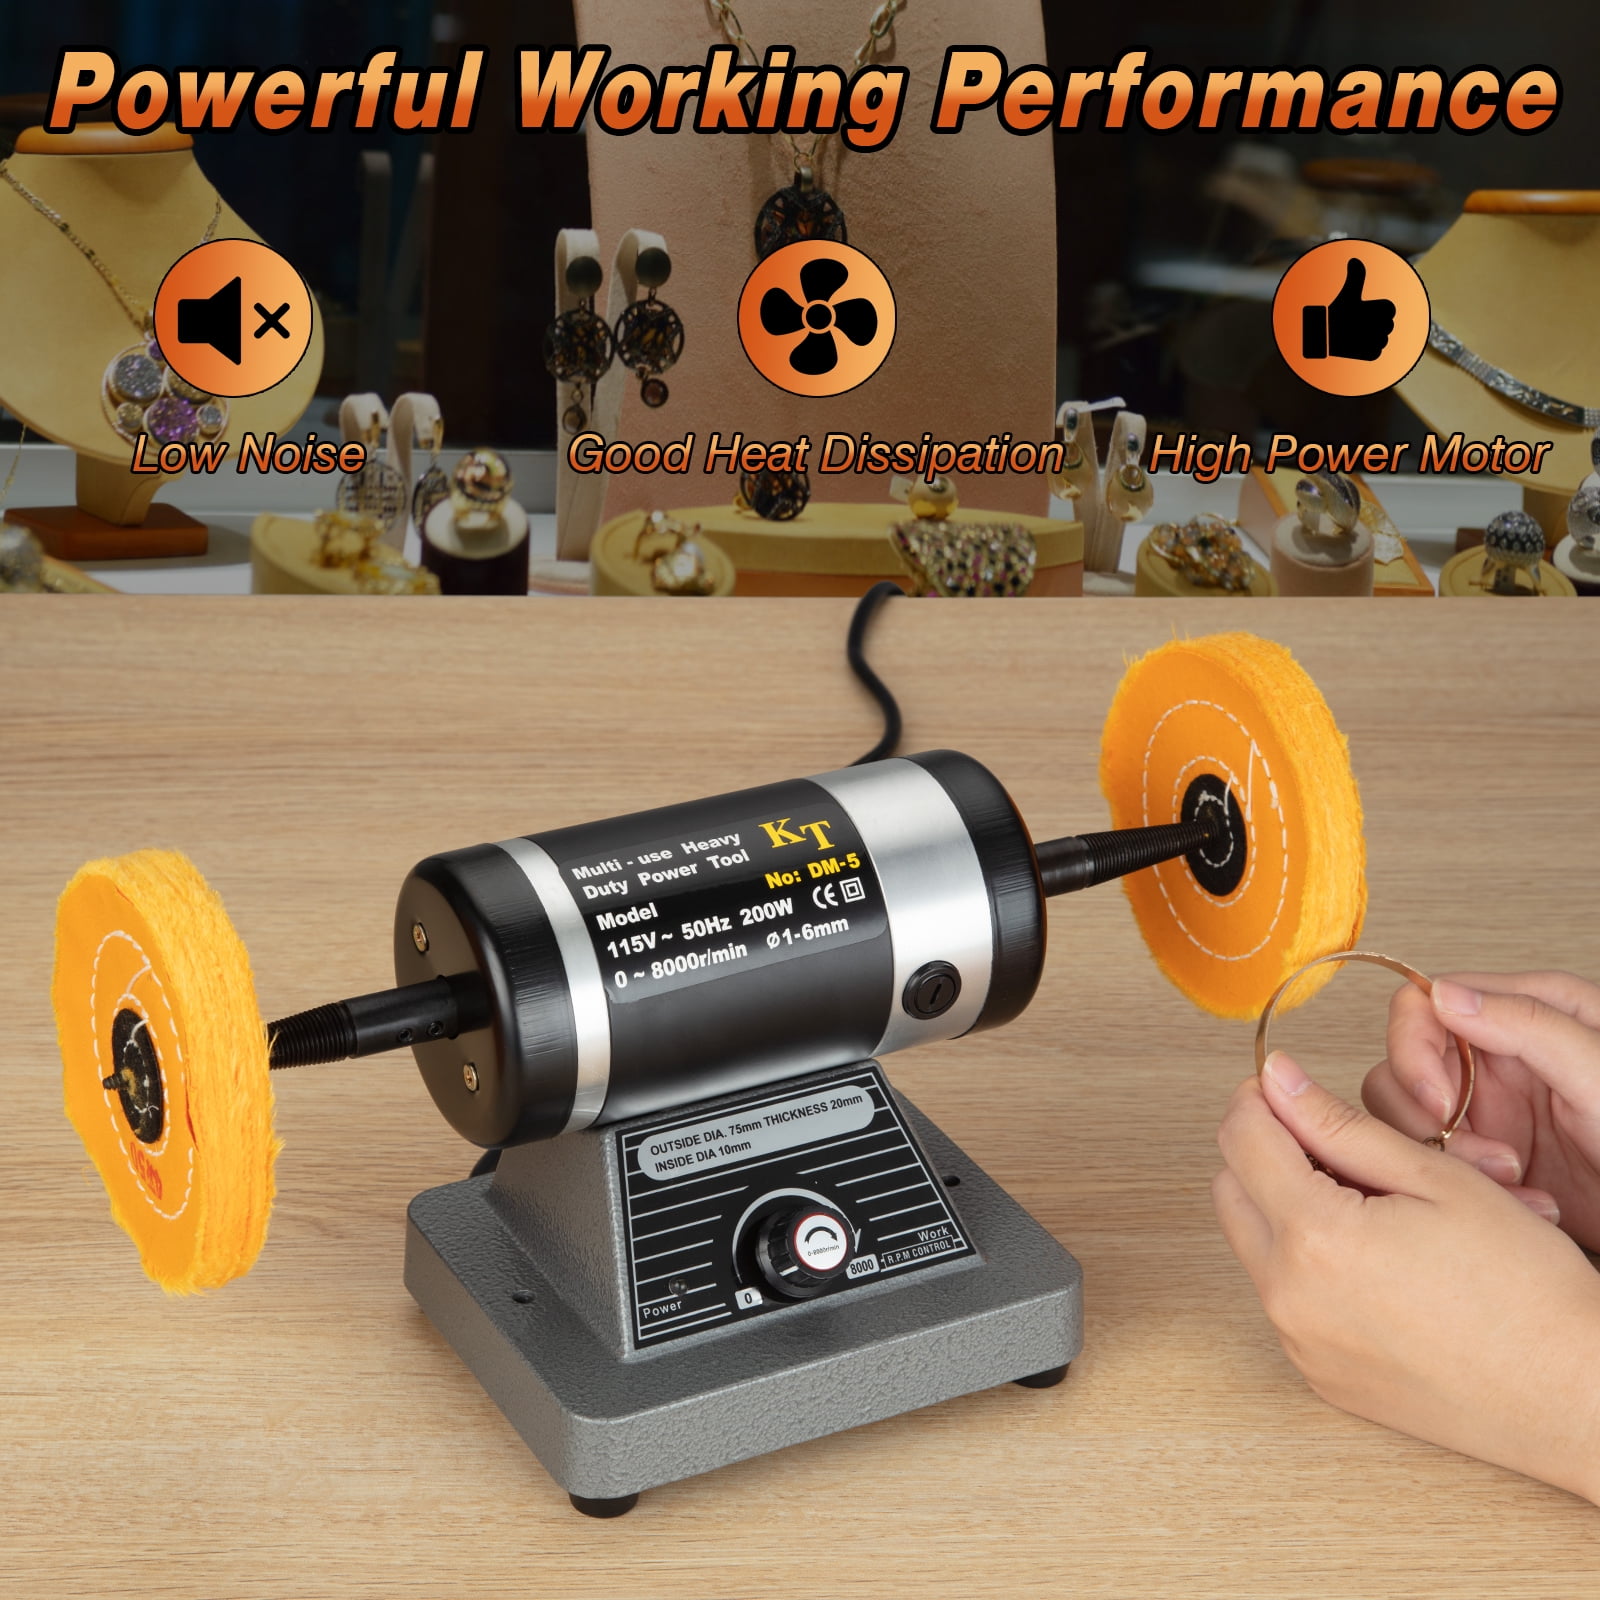 Jewelry Polisher Buffer 200W Jewelry Polishing Buffing Machine Dust Collector with Light 0-8000 RPM Variable Speed Bench Jewelry Rock Grinder